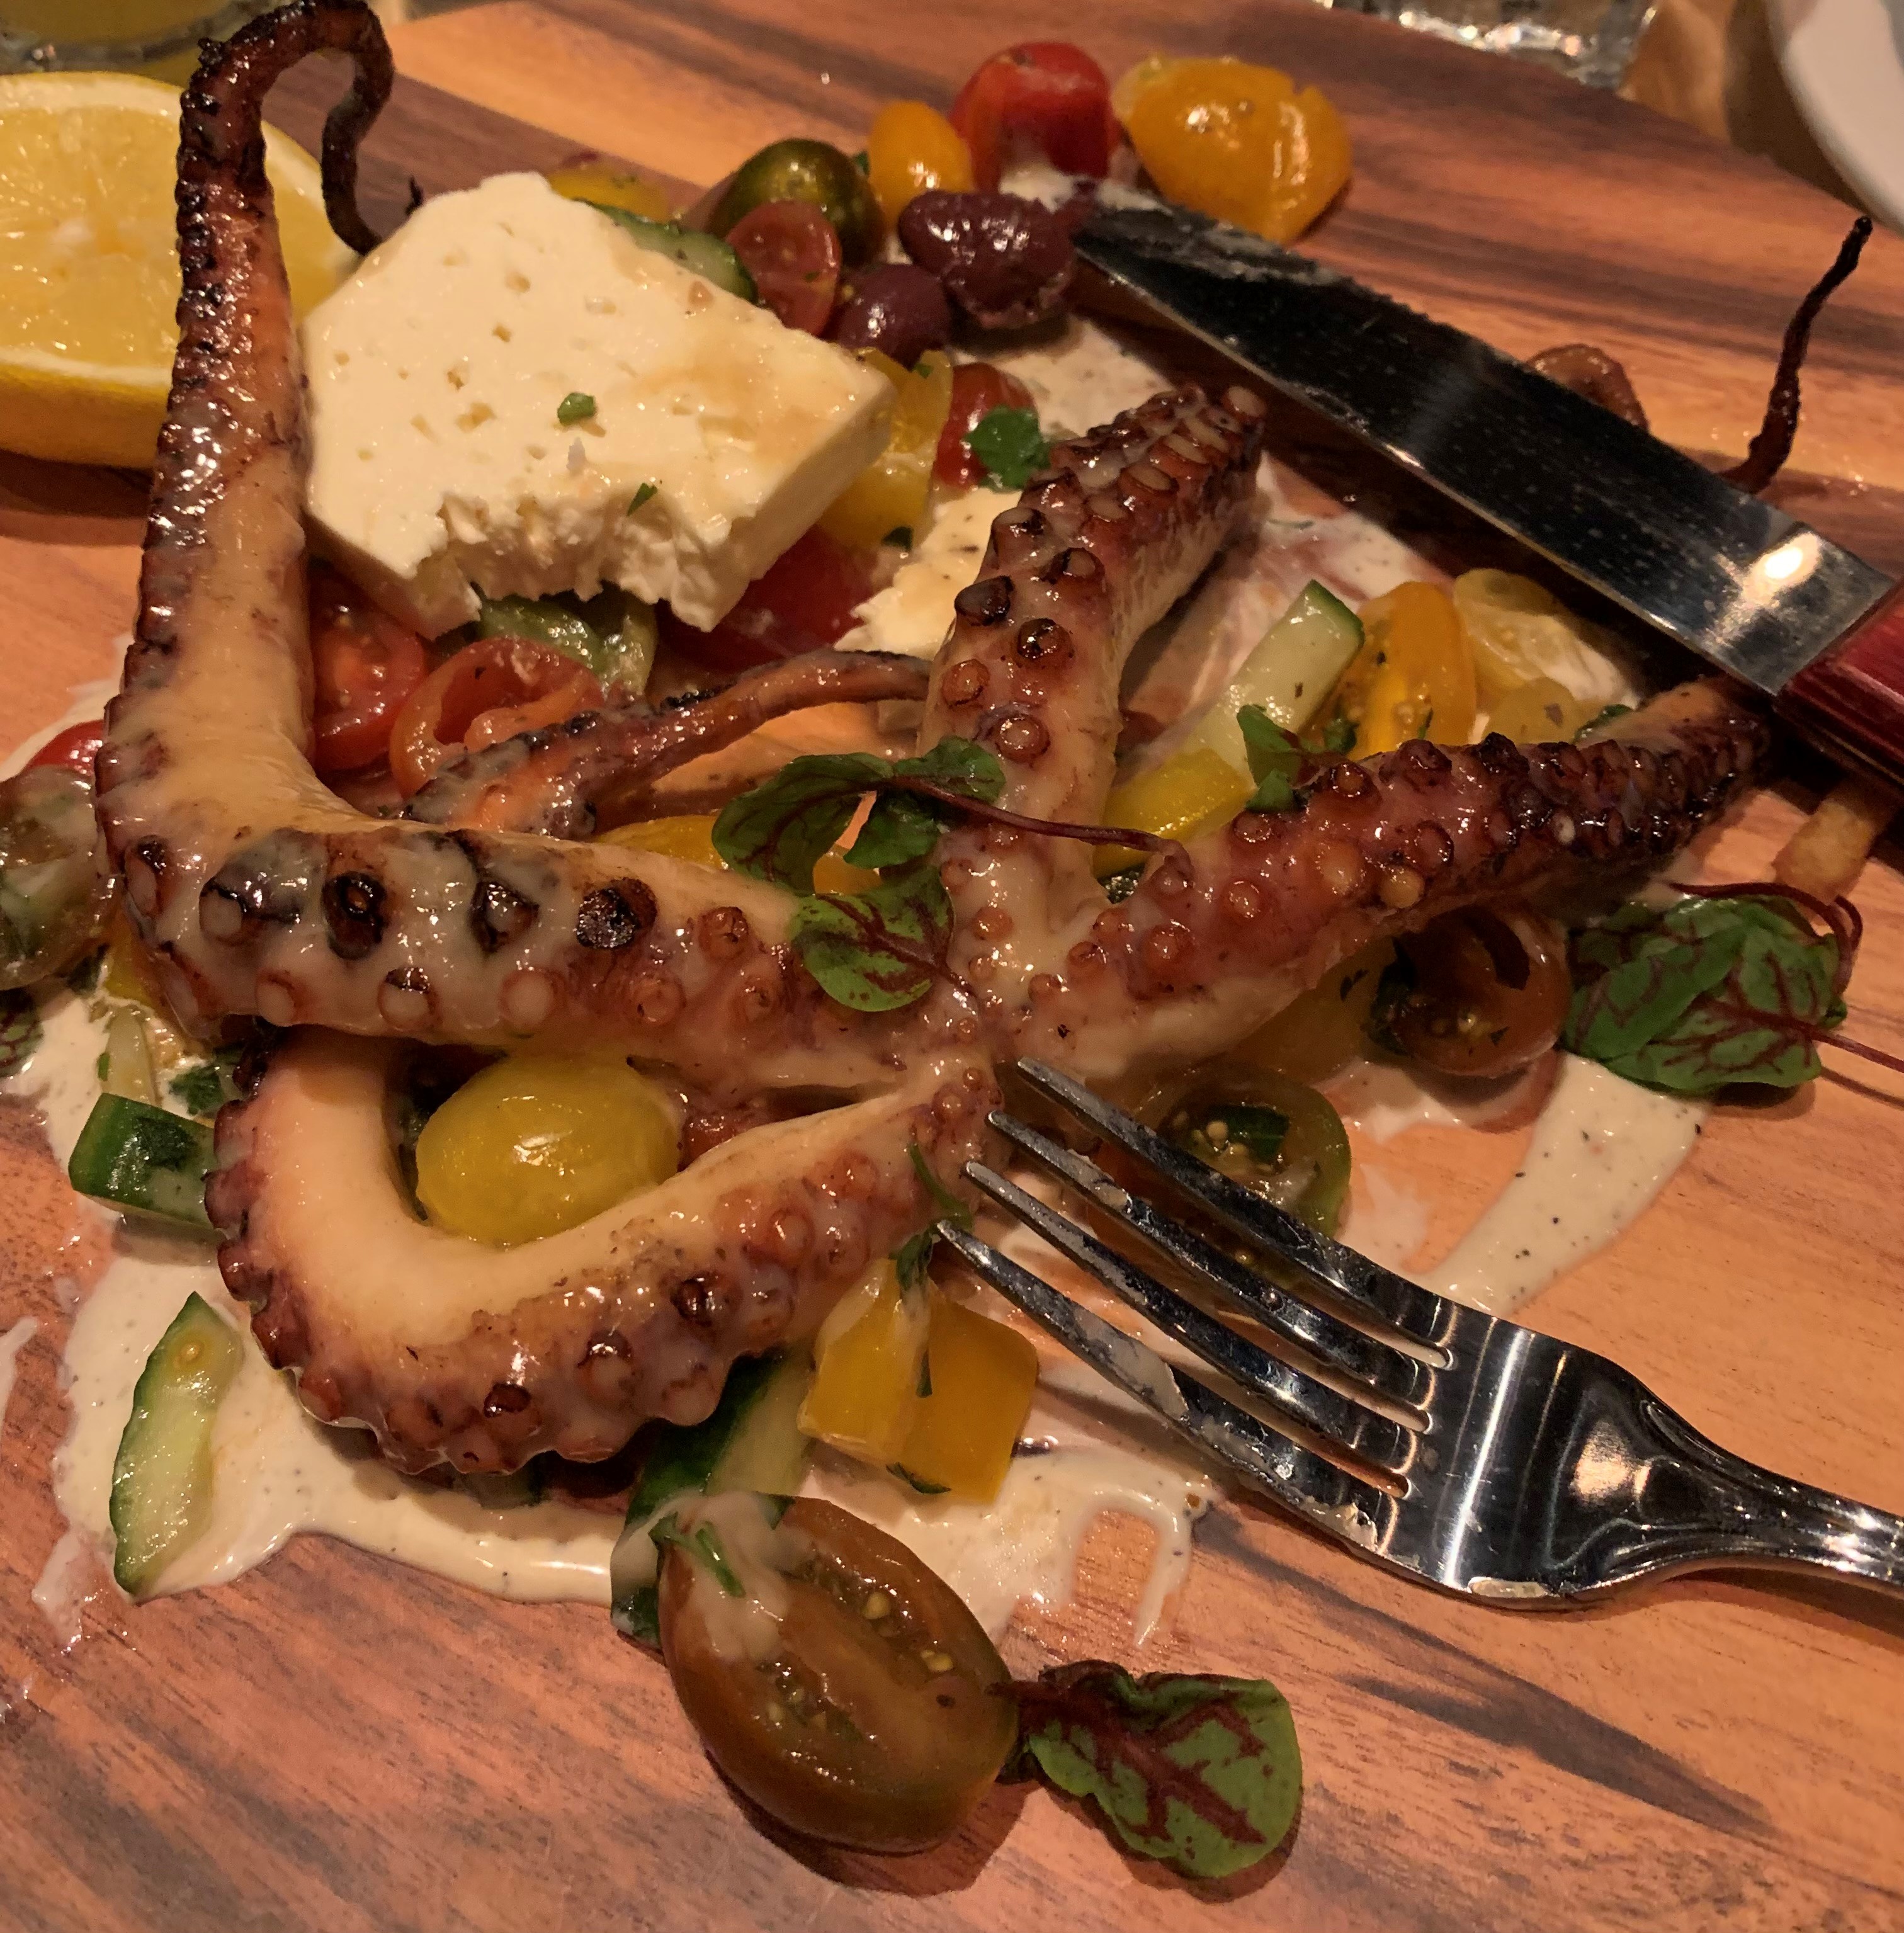 Grilled octopus from Lucille's, in the Monkland village